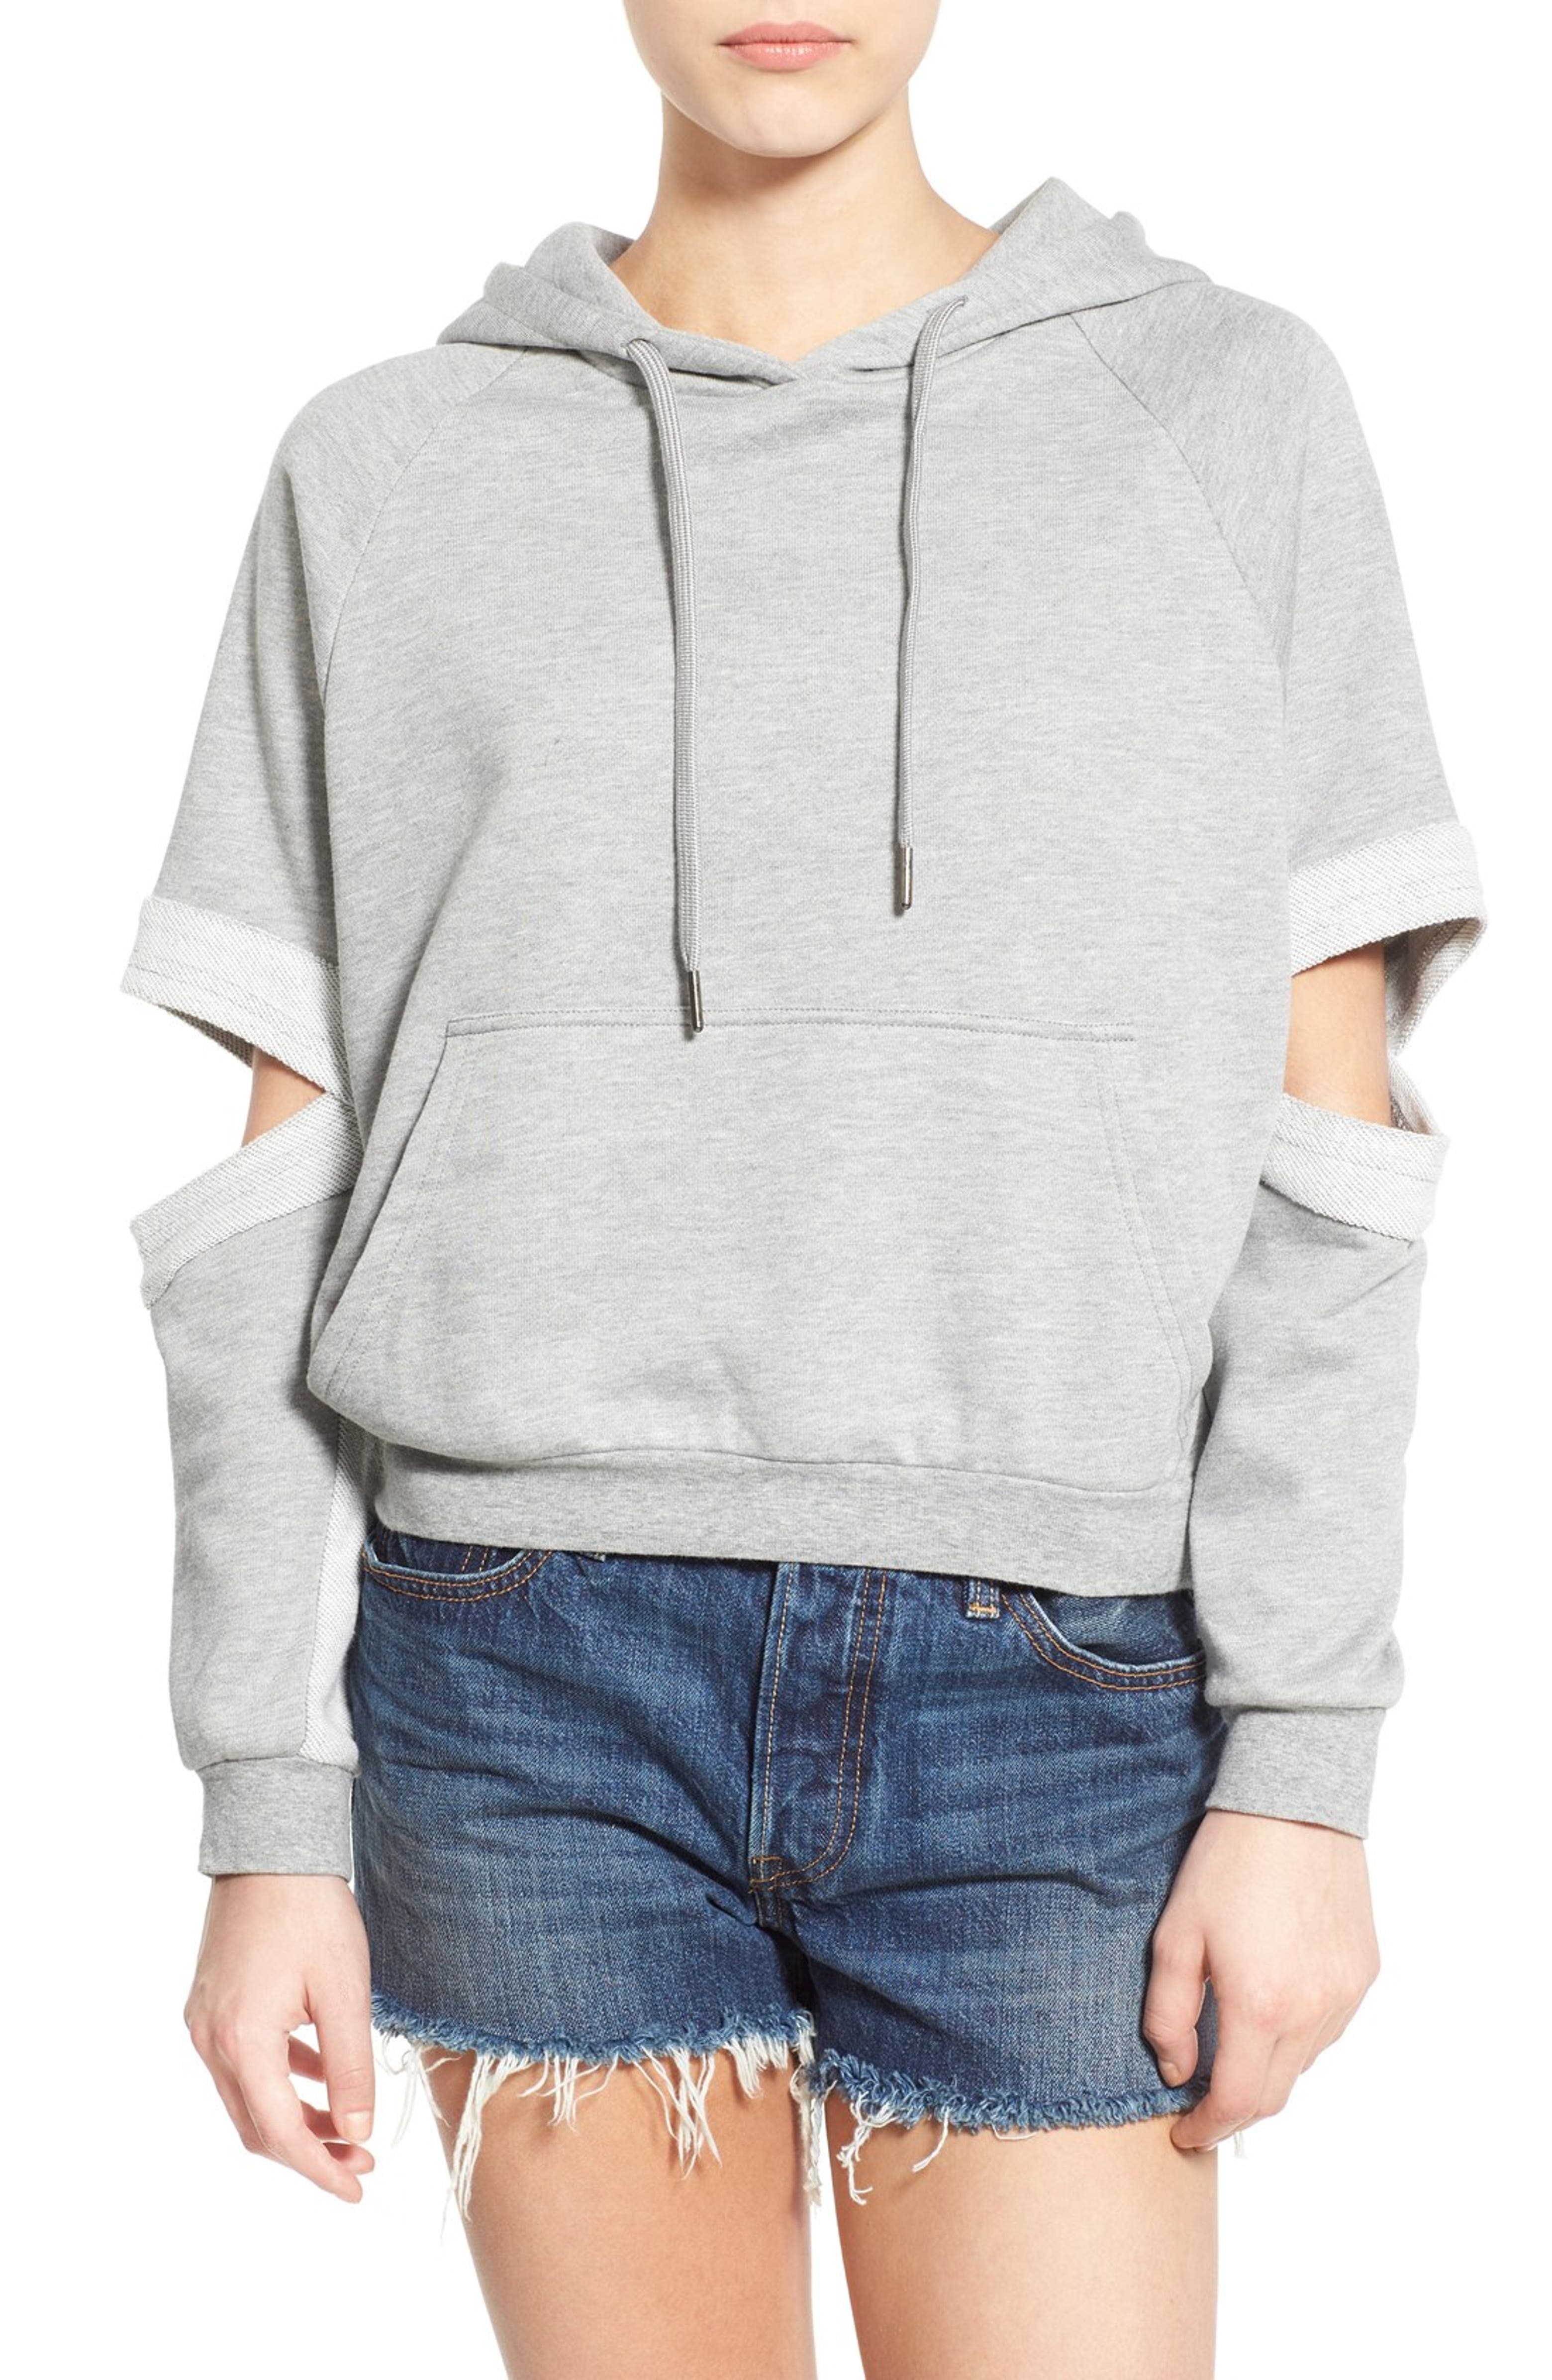 PUBLISH BRAND 'Lucia' Cutout Sleeve Hoodie | Nordstrom